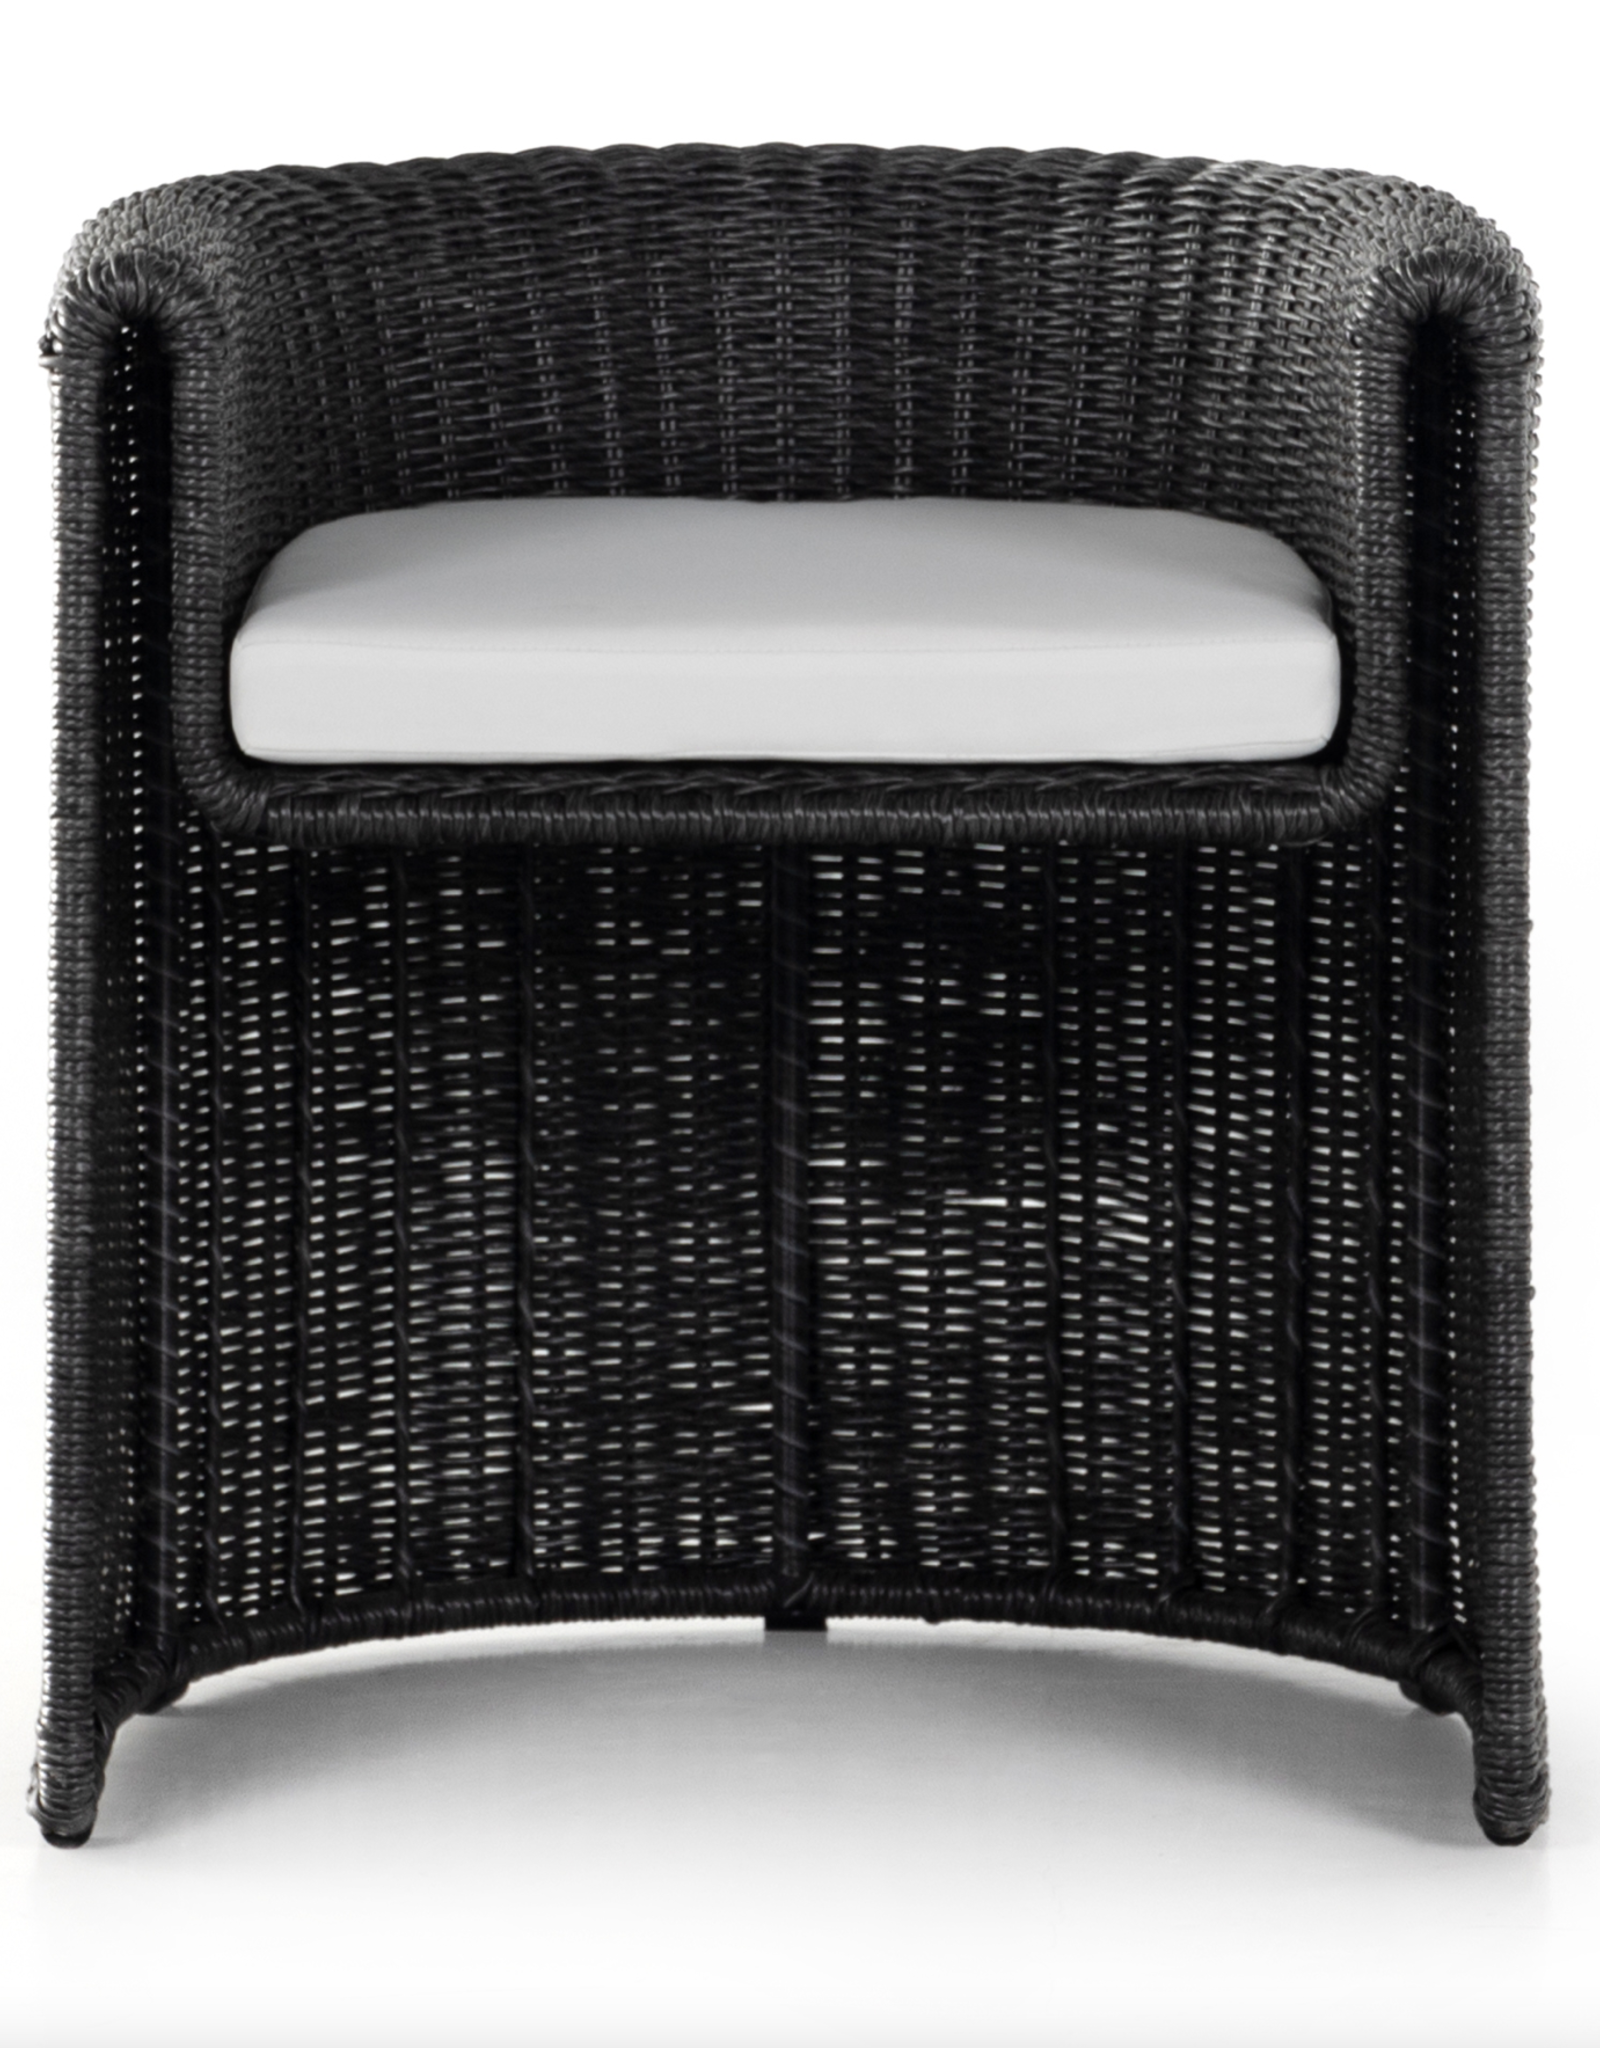 Tucson Outdoor Dining Armchair in Vintage Coal